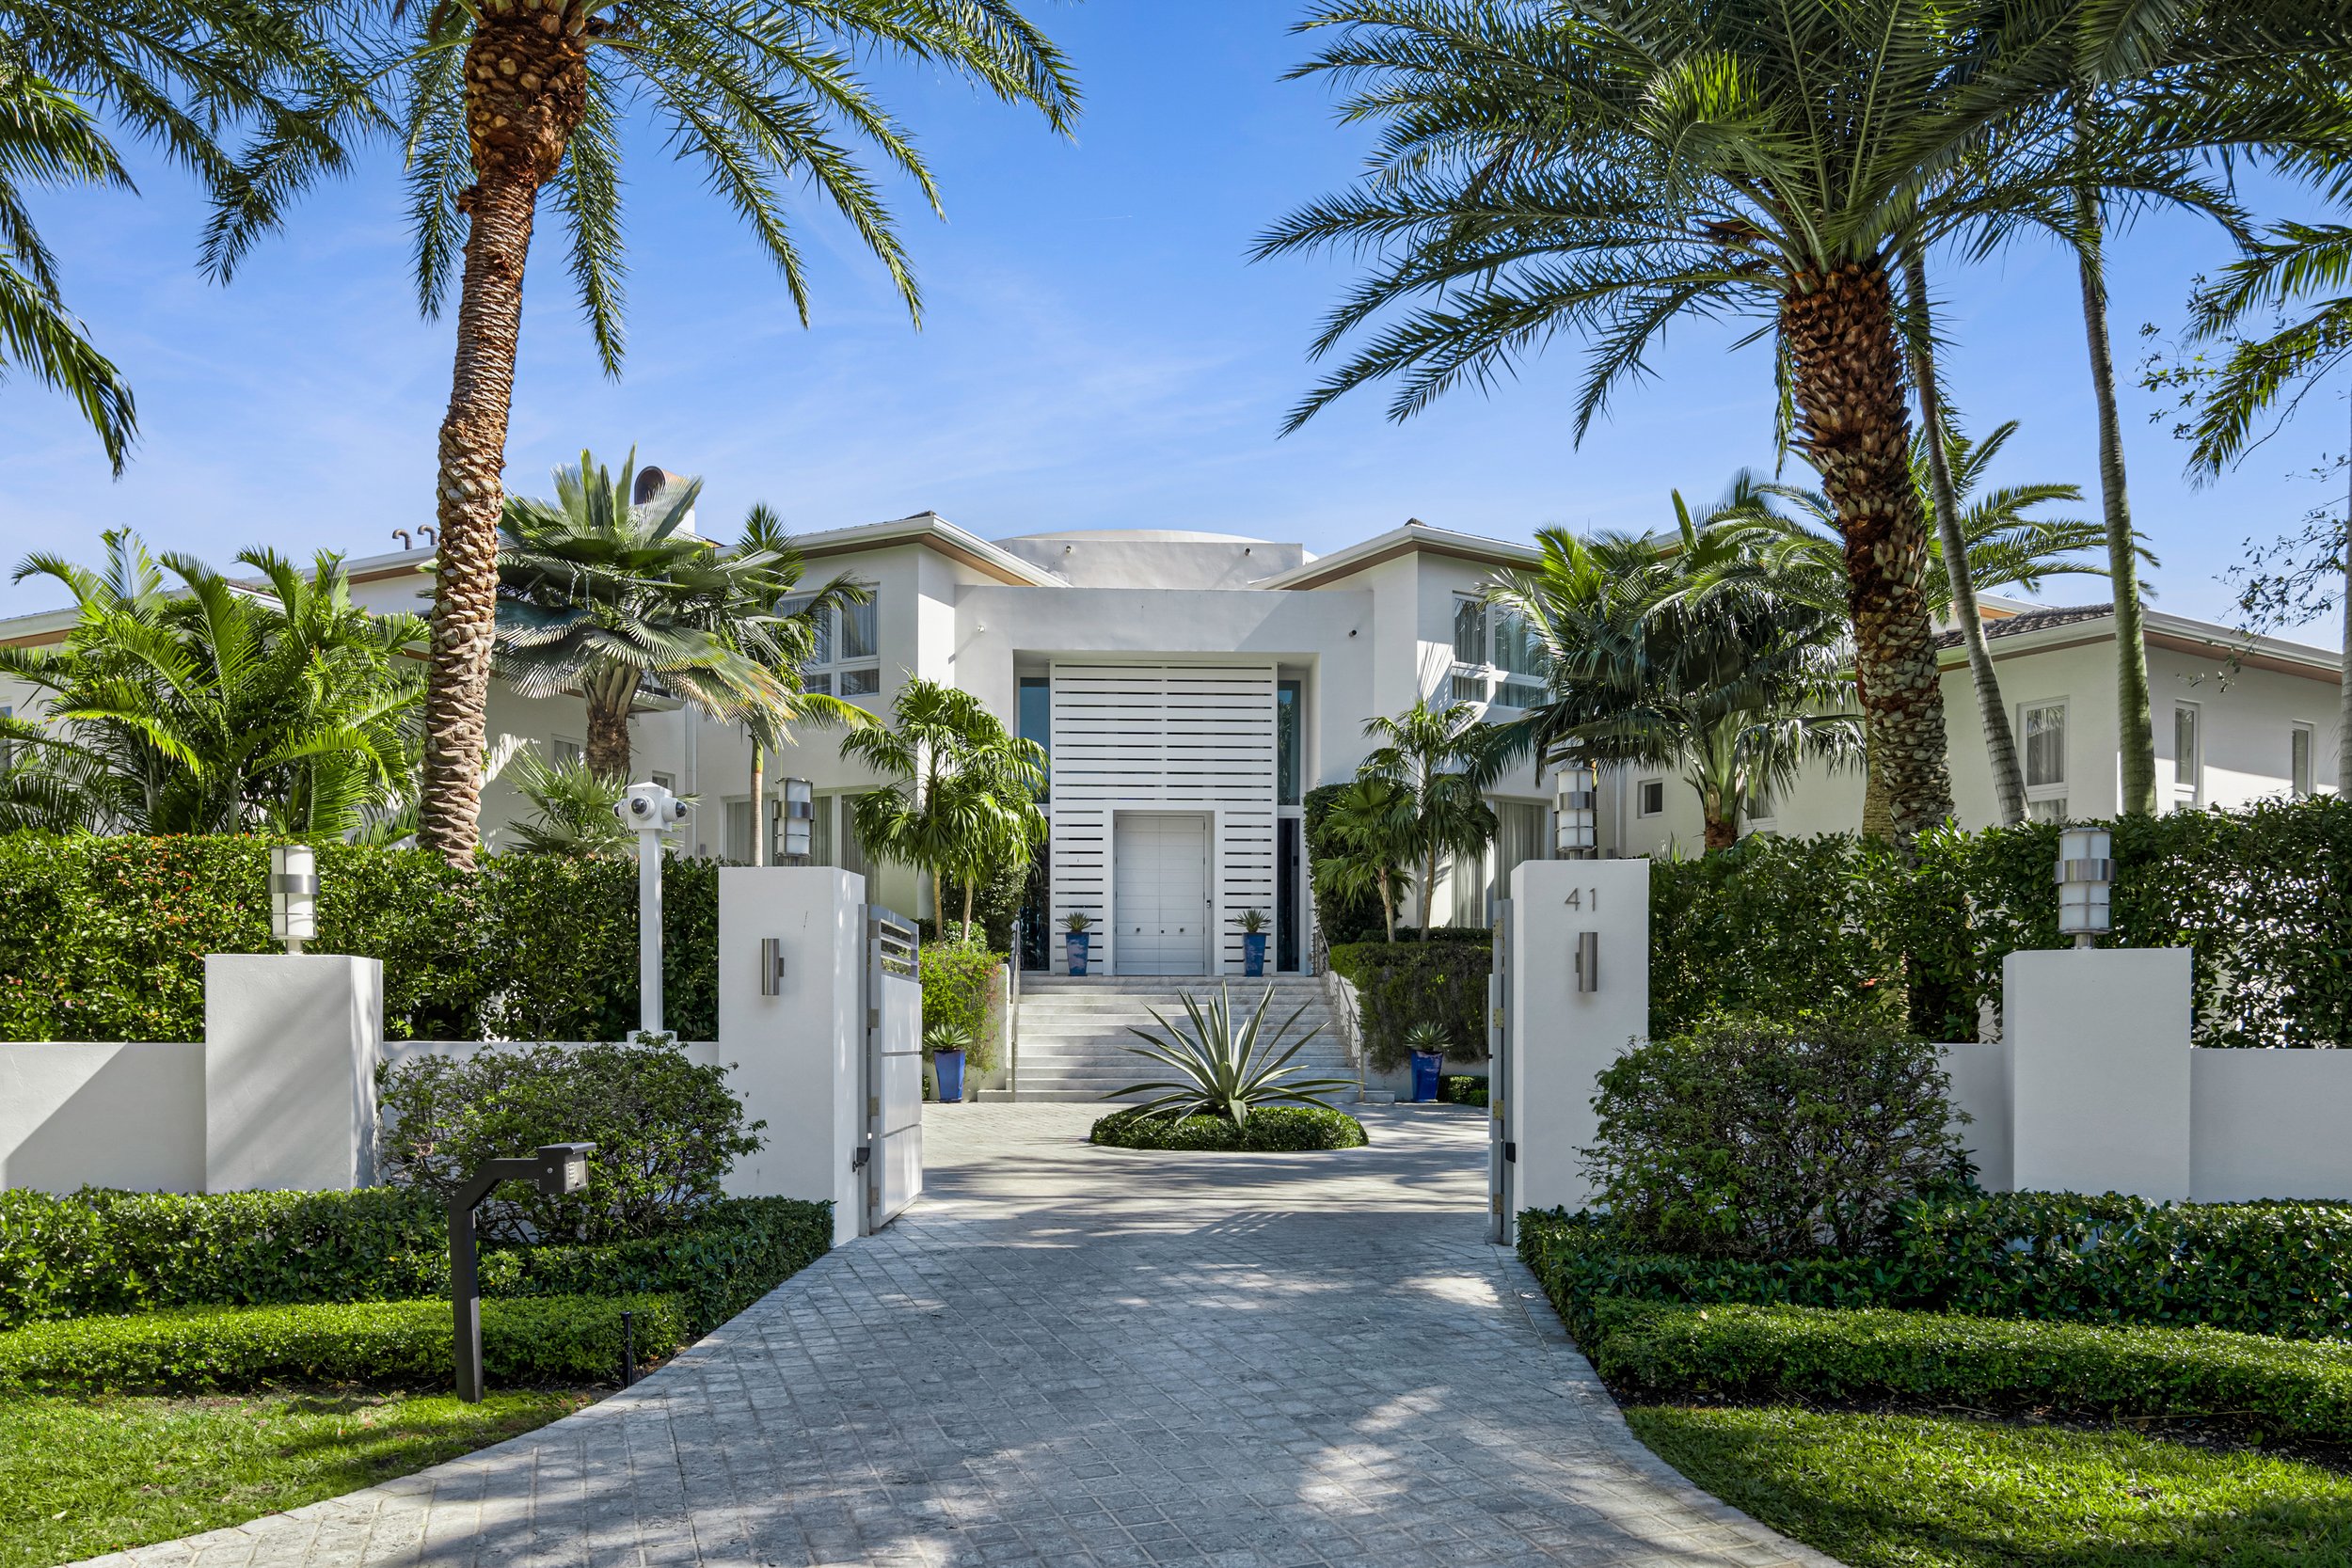 Coral Gables Waterfront Estate Hits The Market For $57 Million 3.jpg